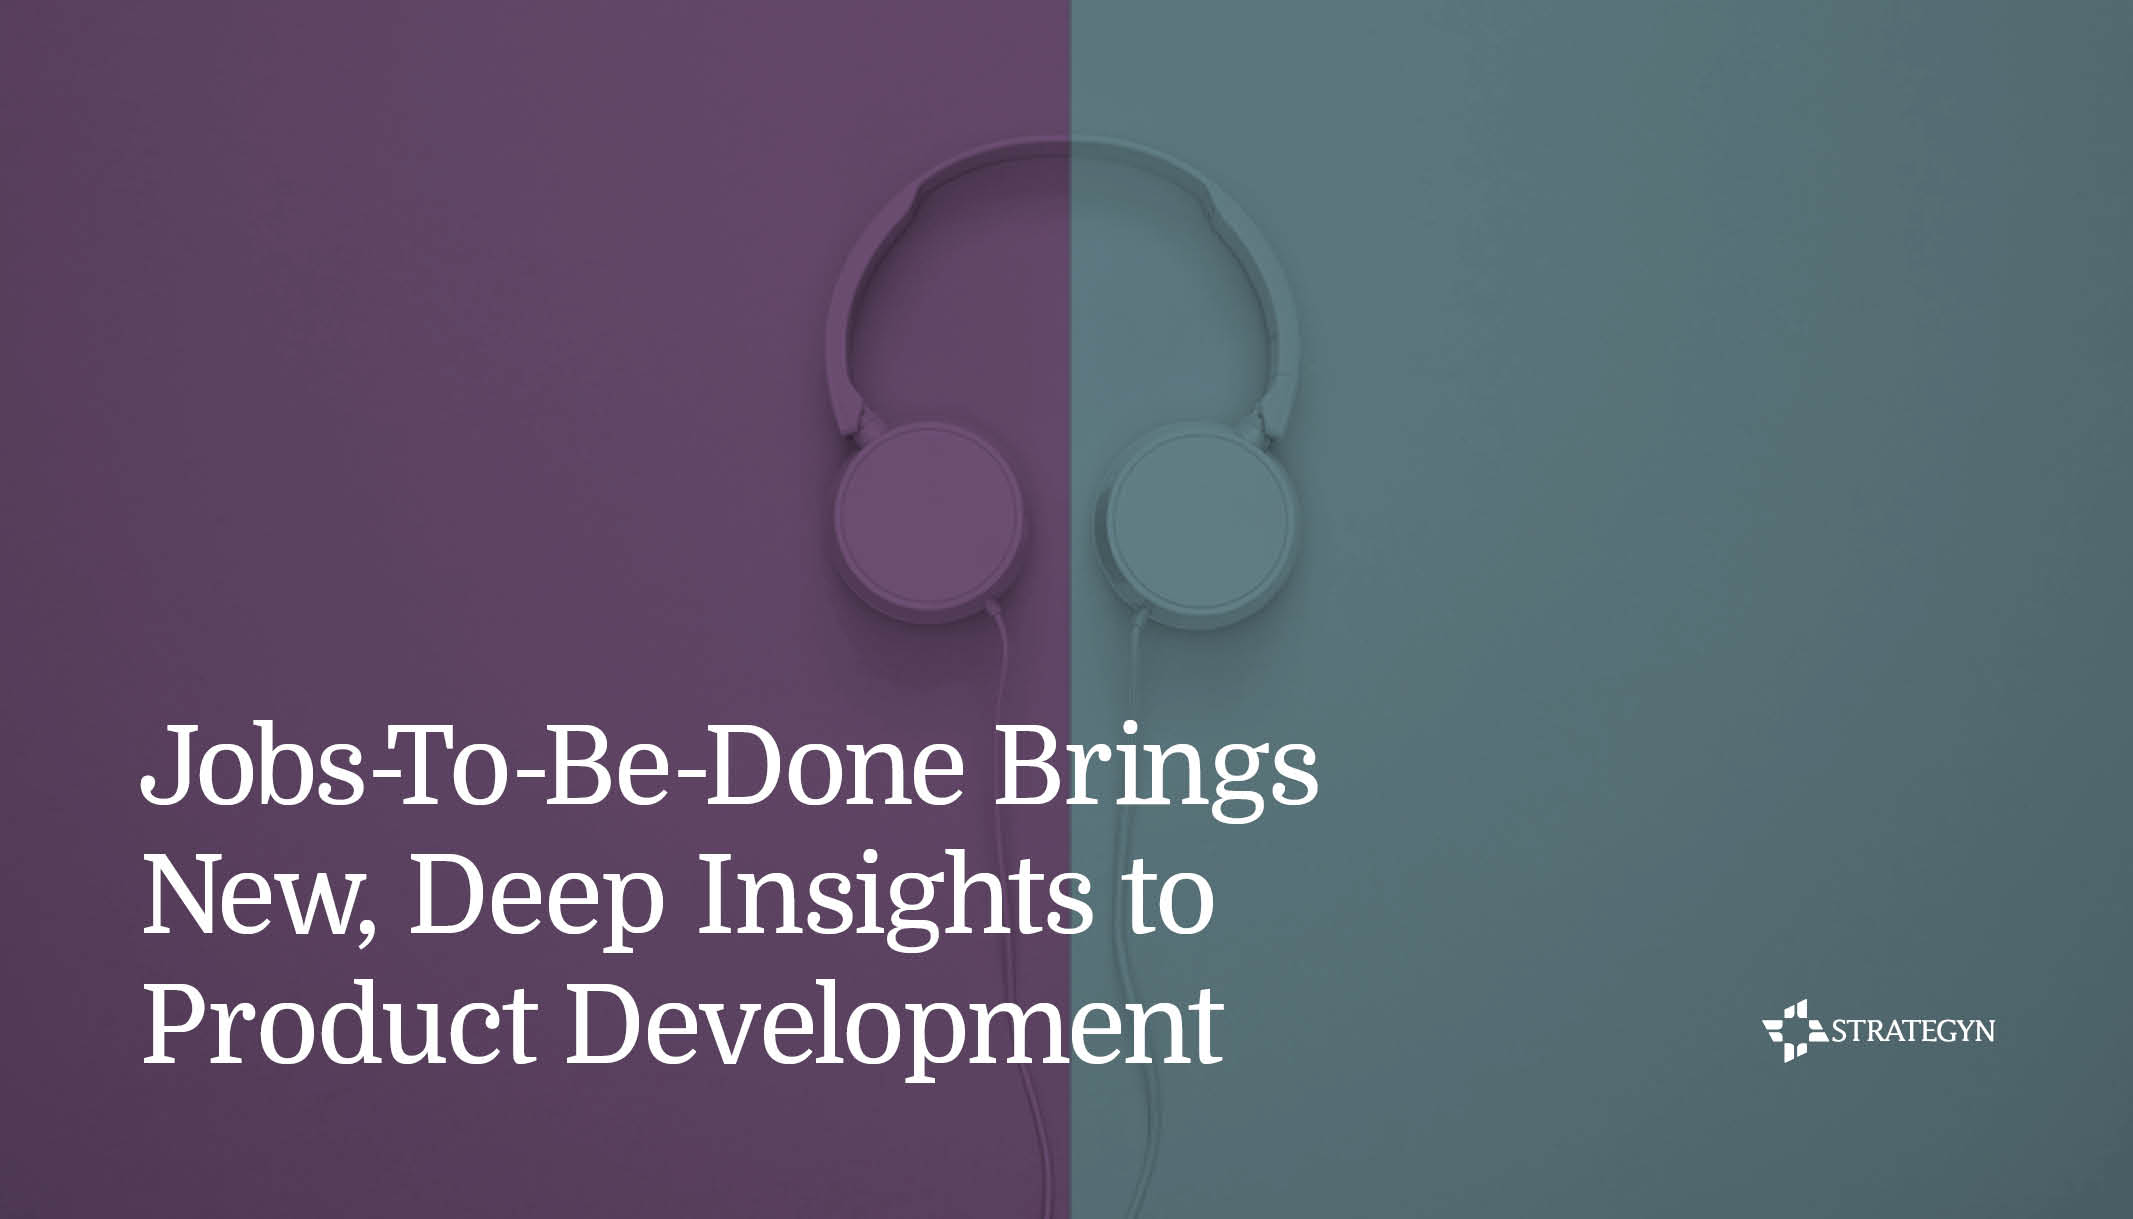 Jobs-To-Be-Done Brings New, Deep Insights to Product Development